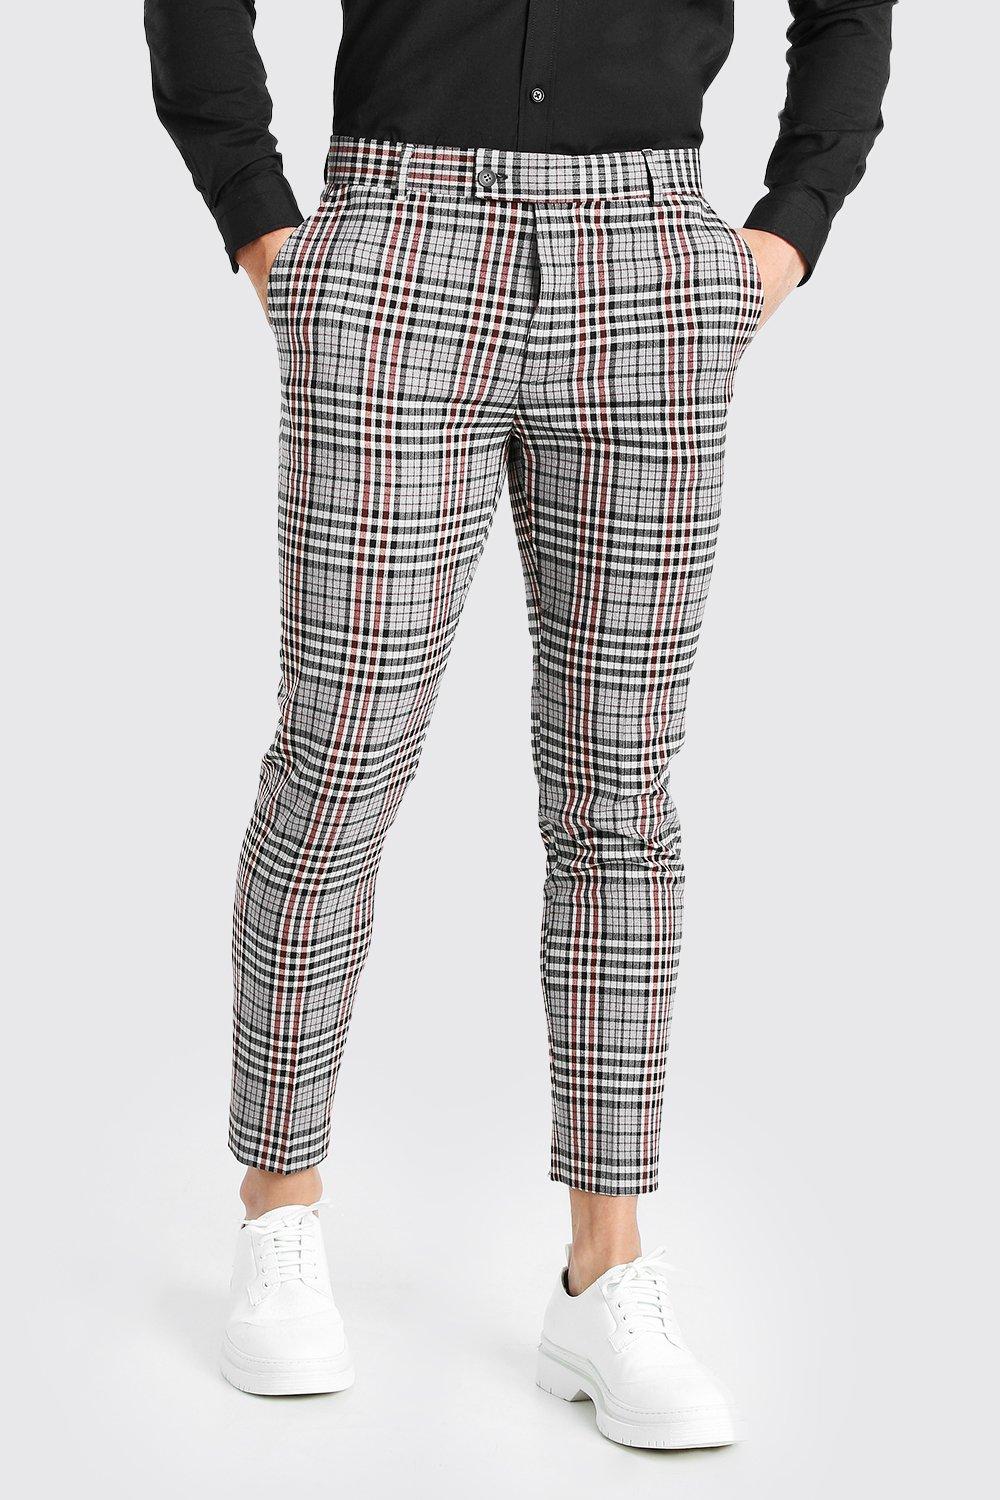 tight fitted plaid pants